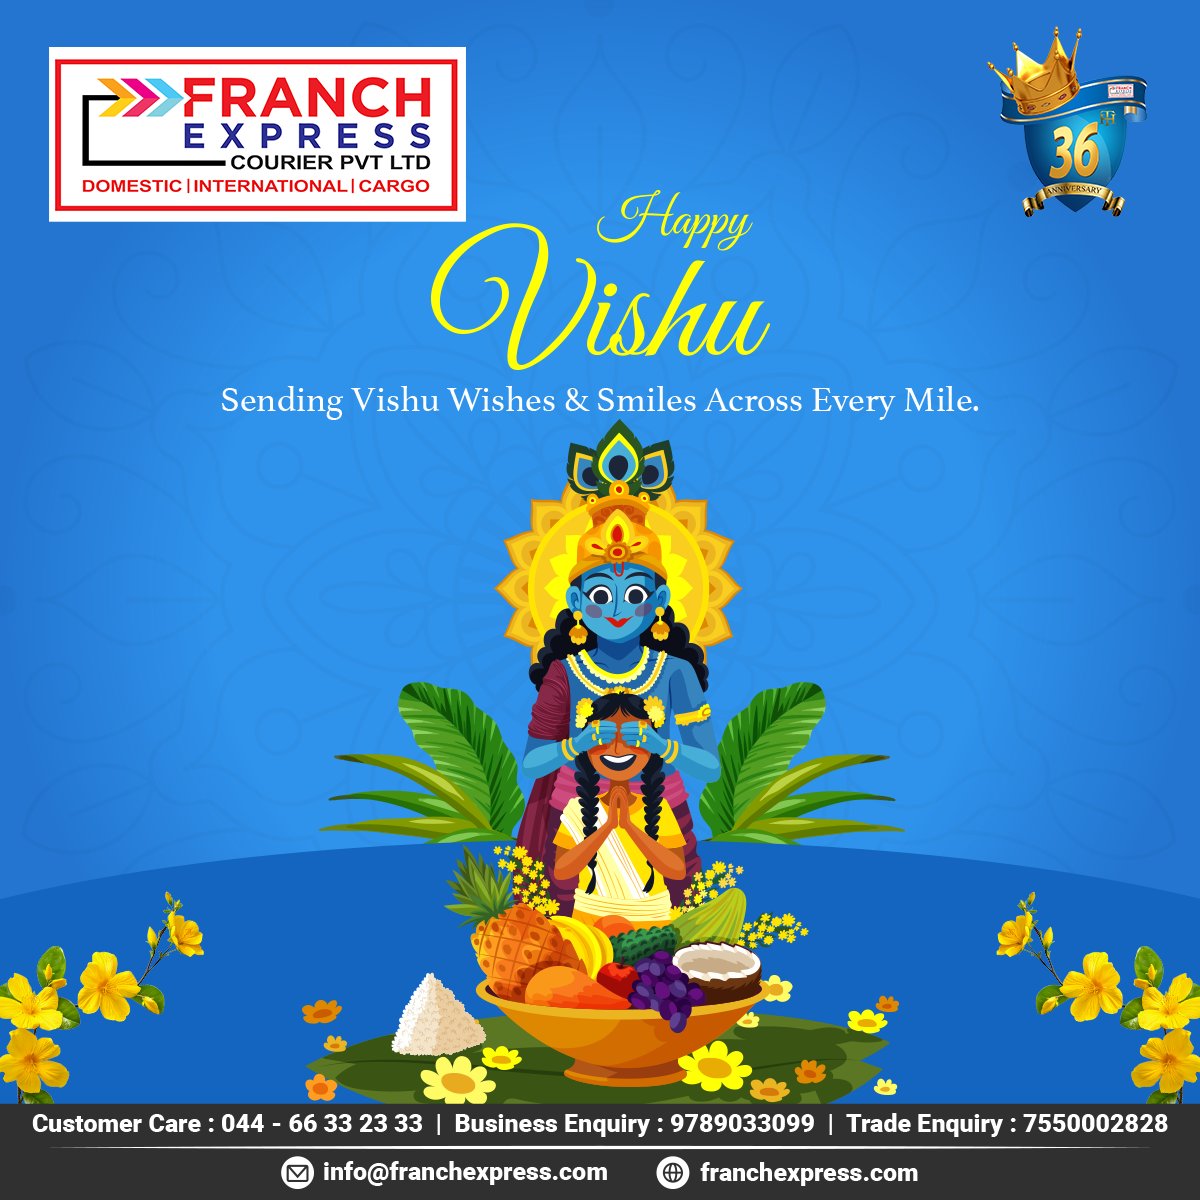 Wishing you all a joyful and prosperous Vishu from Franch Express Courier Pvt Ltd! 🌼🌿 

#HappyVishu #SpeedyShipping #CourierExcellence
#DeliverySolutions #LogisticsLeadership
#OnTimeEveryTime #courierservices #speedydelivery
#shipping #onetimecourier #logisticsolutions